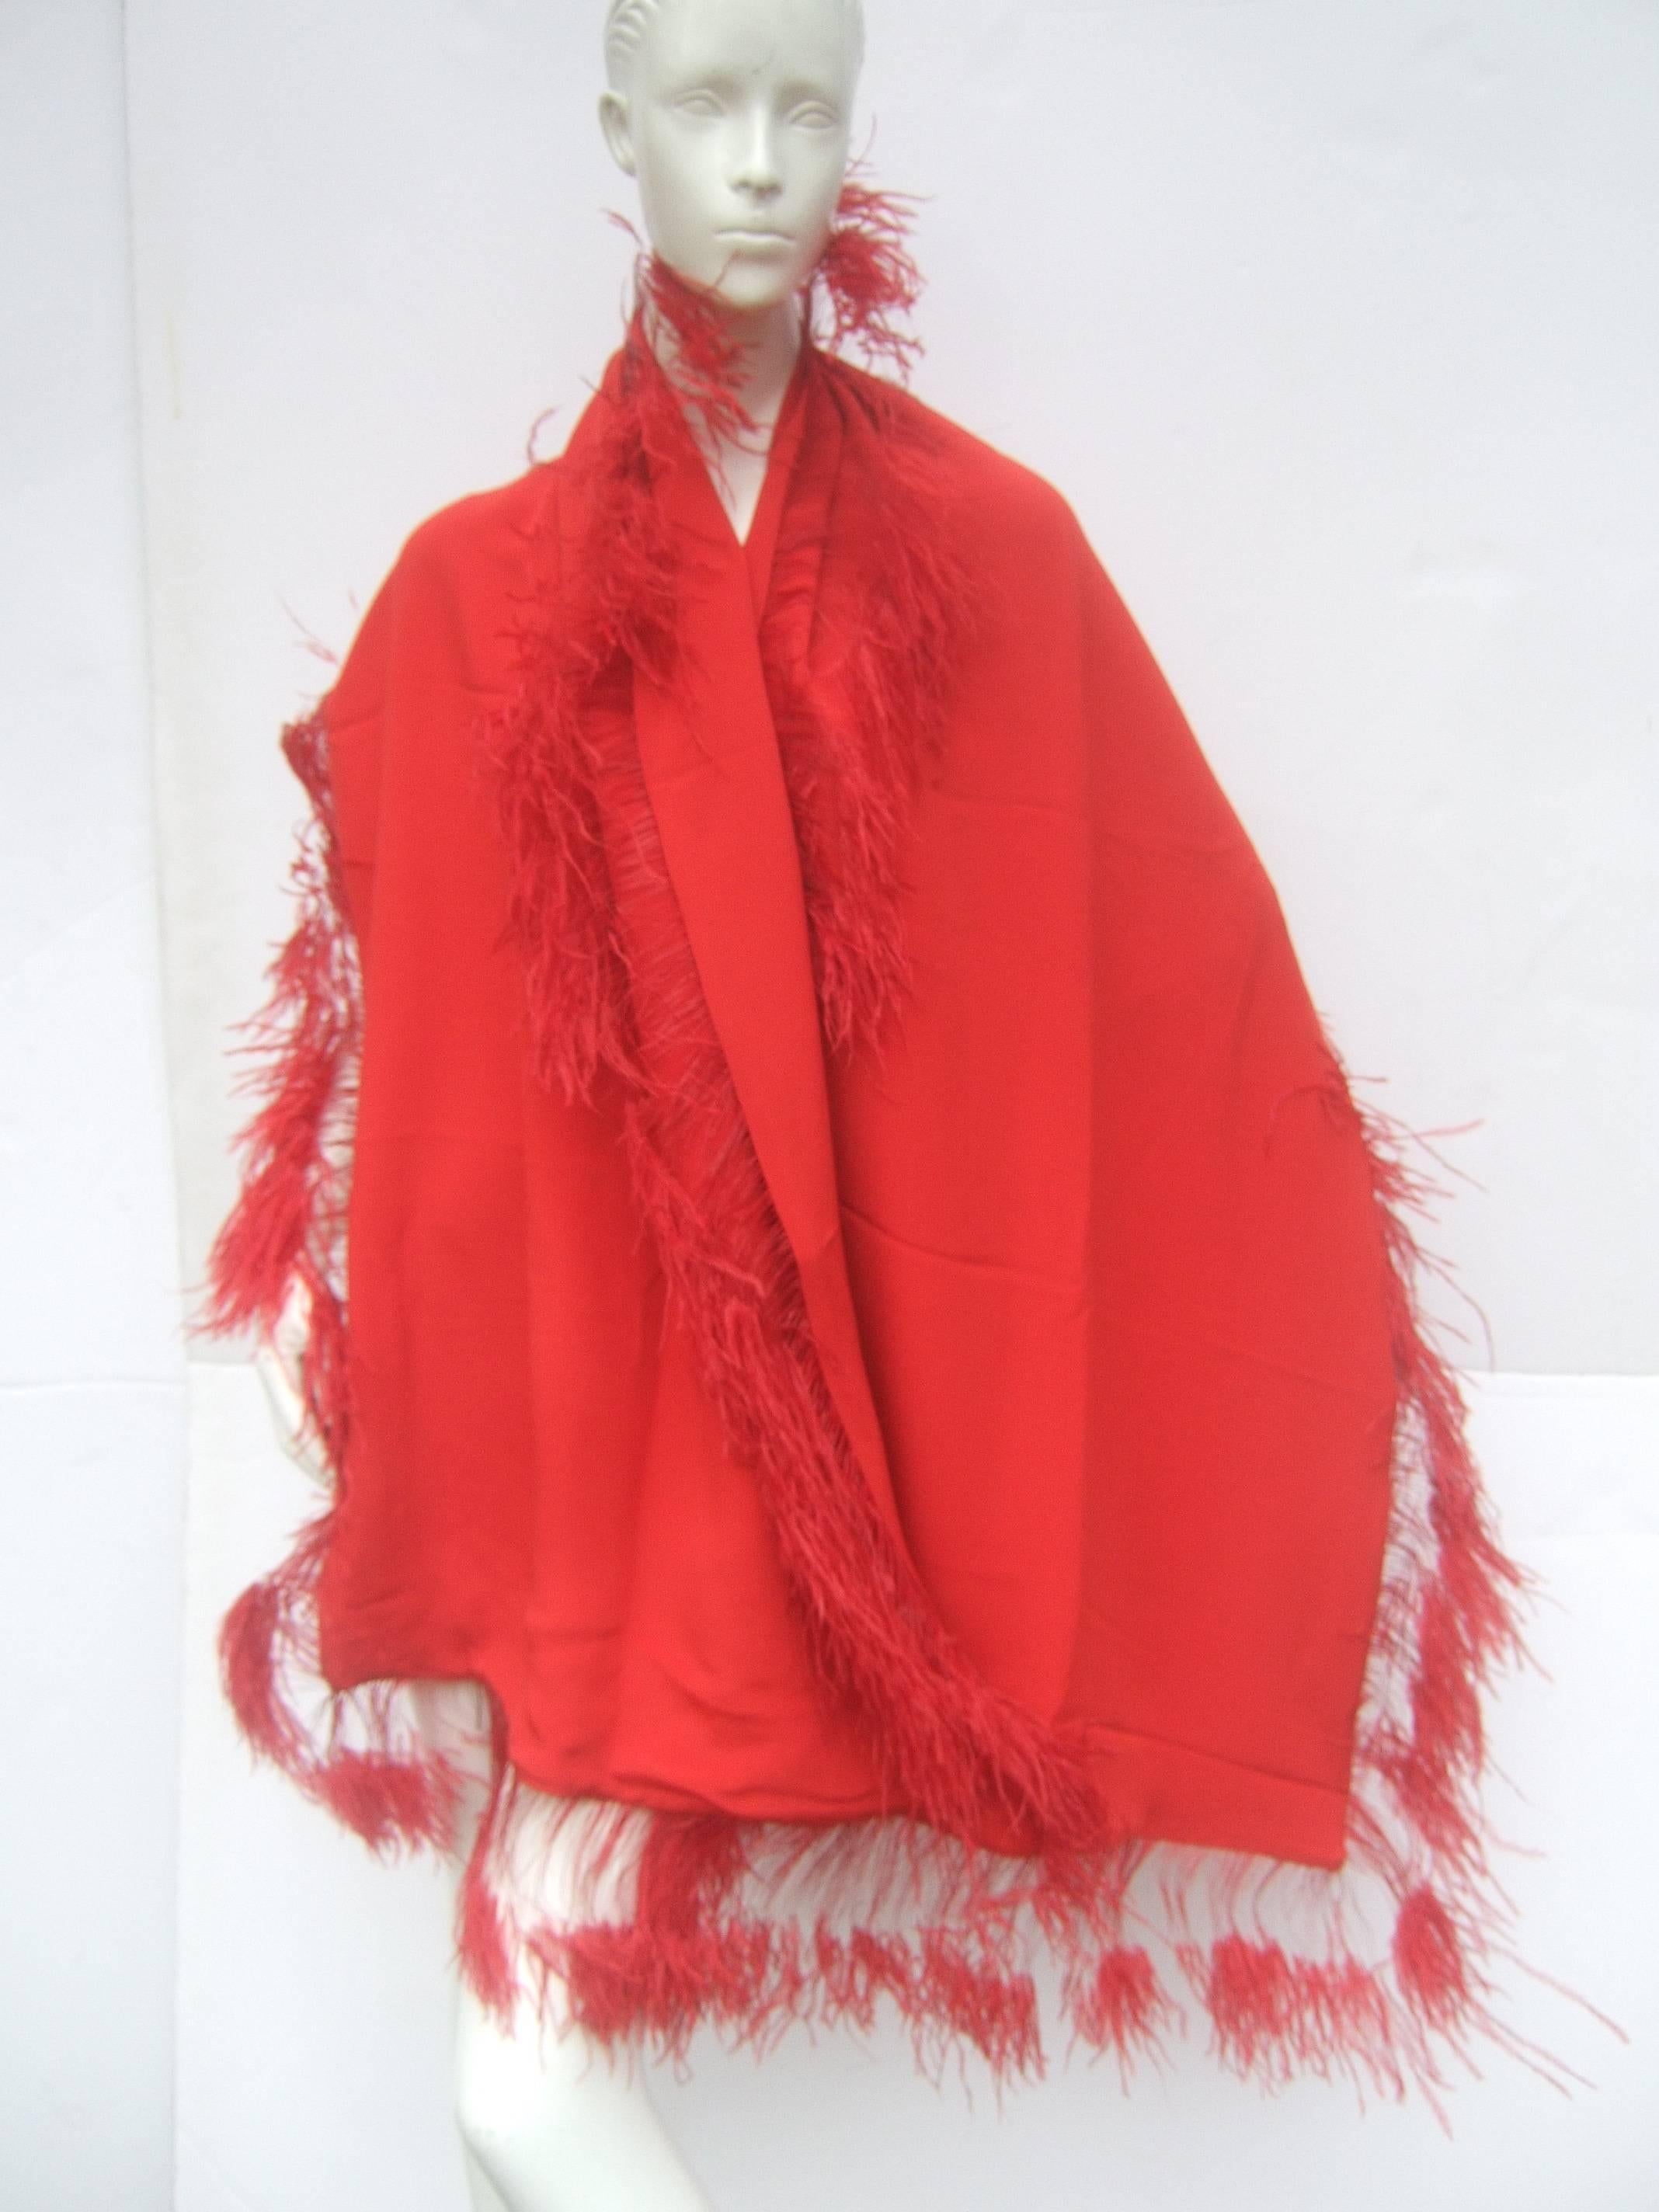 Neiman Marcus Scarlet feather trim shawl 
The stylish dramatic wrap is designed with
double faced silk

The feather trim frames the oblong shawl 
The exotic feather detail makes a chic 
bold accessory 

Perfect for the holidays or special